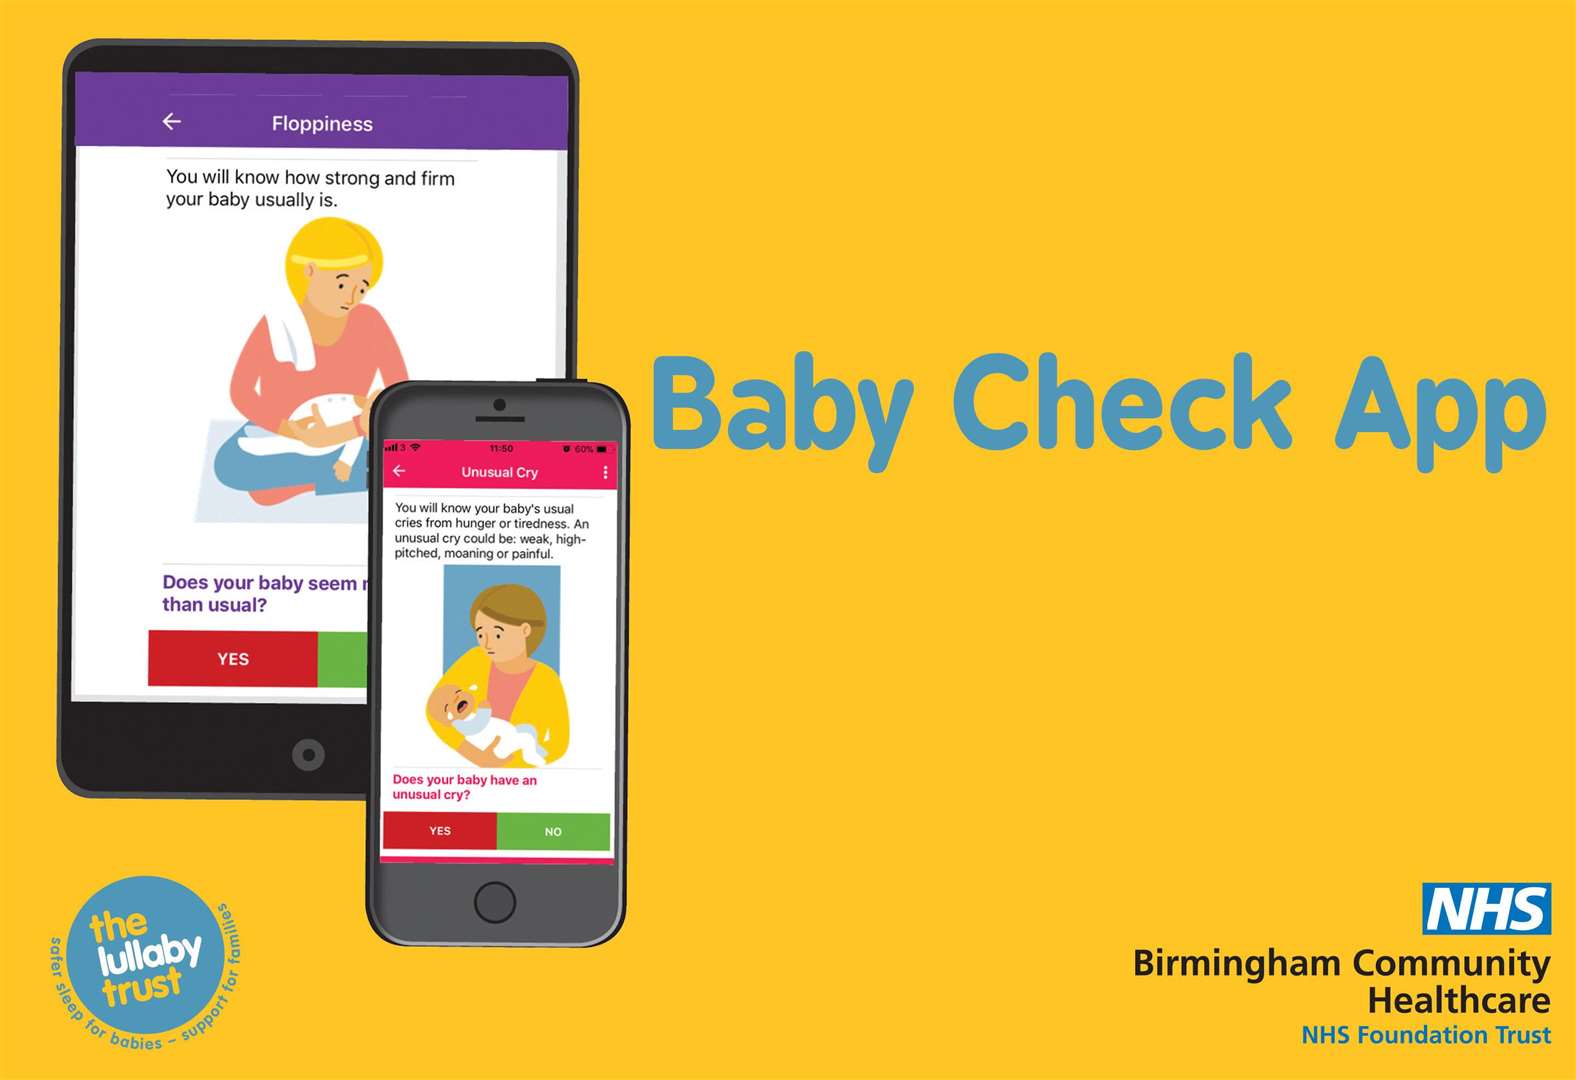 The homescreen of the Baby Check app